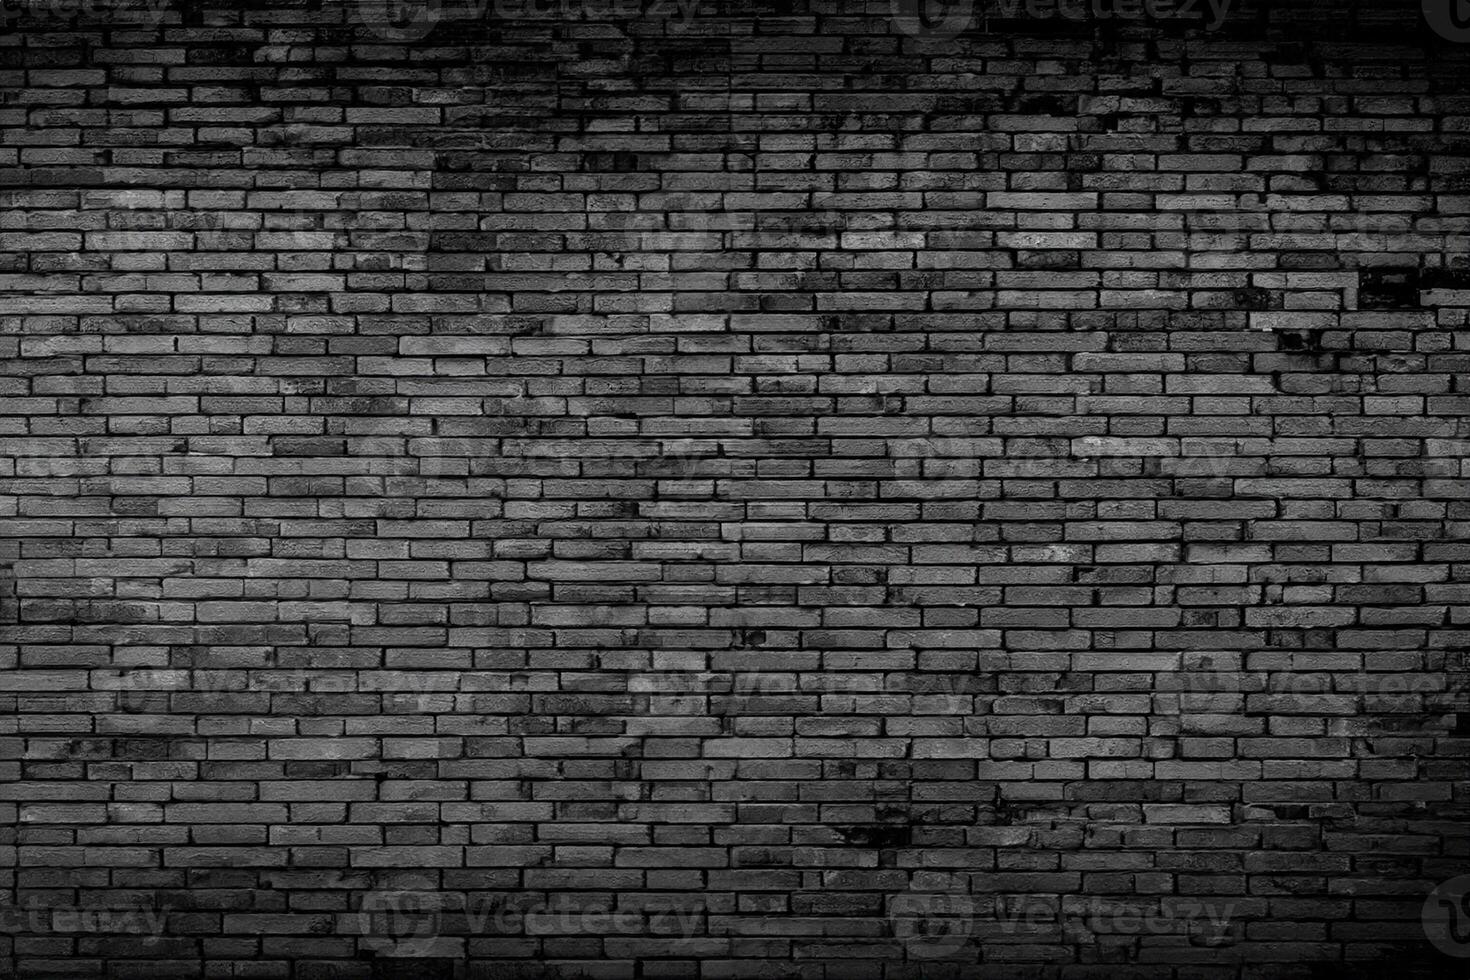 Black brick walls that are not plastered background and texture. The texture of the brick is black. Background of empty brick basement wall. photo